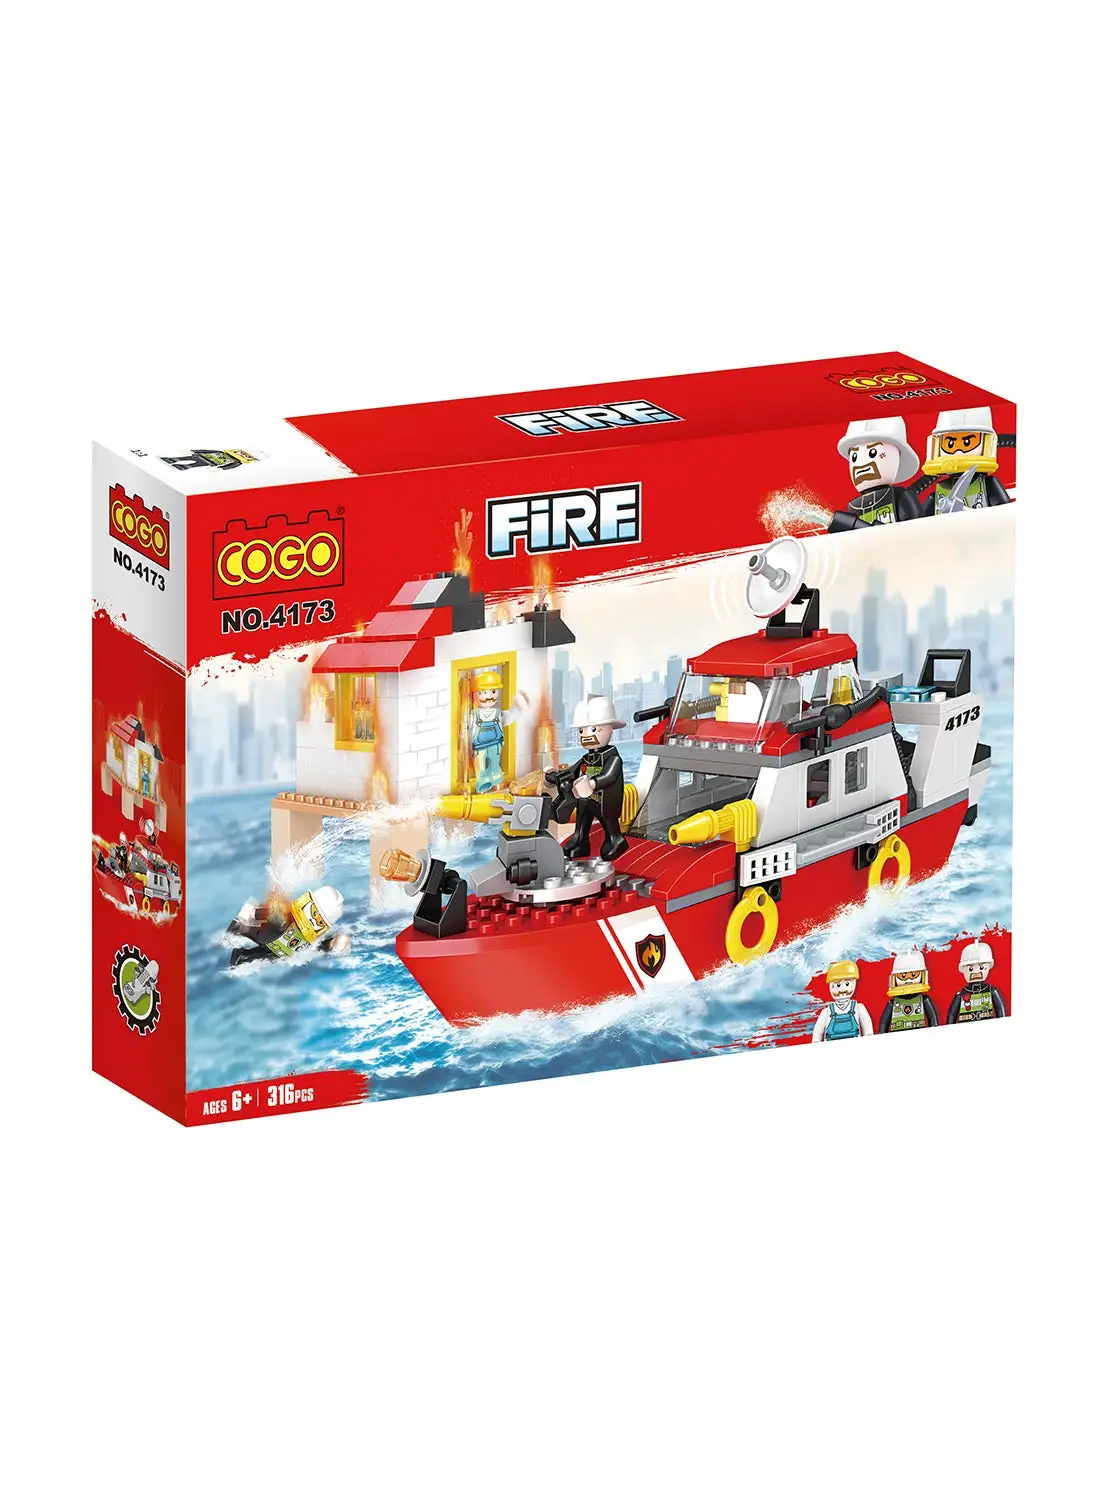 COGO 4173 316-Piece Firefighter Series Non-Toxic Building Blocks Set For Kids 6+ Years